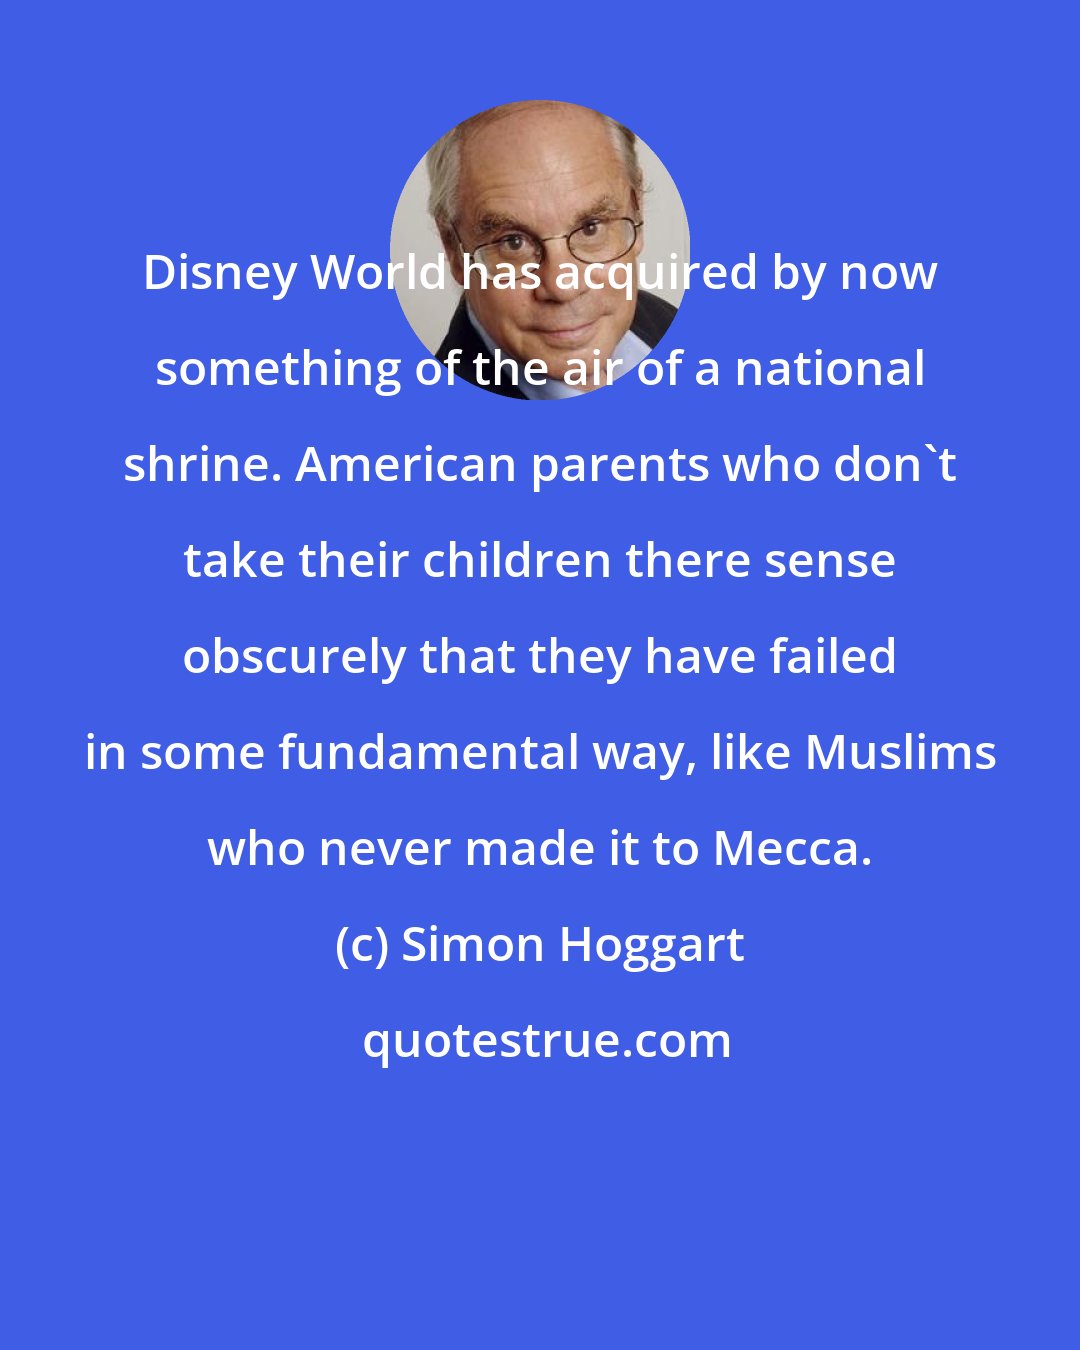 Simon Hoggart: Disney World has acquired by now something of the air of a national shrine. American parents who don't take their children there sense obscurely that they have failed in some fundamental way, like Muslims who never made it to Mecca.